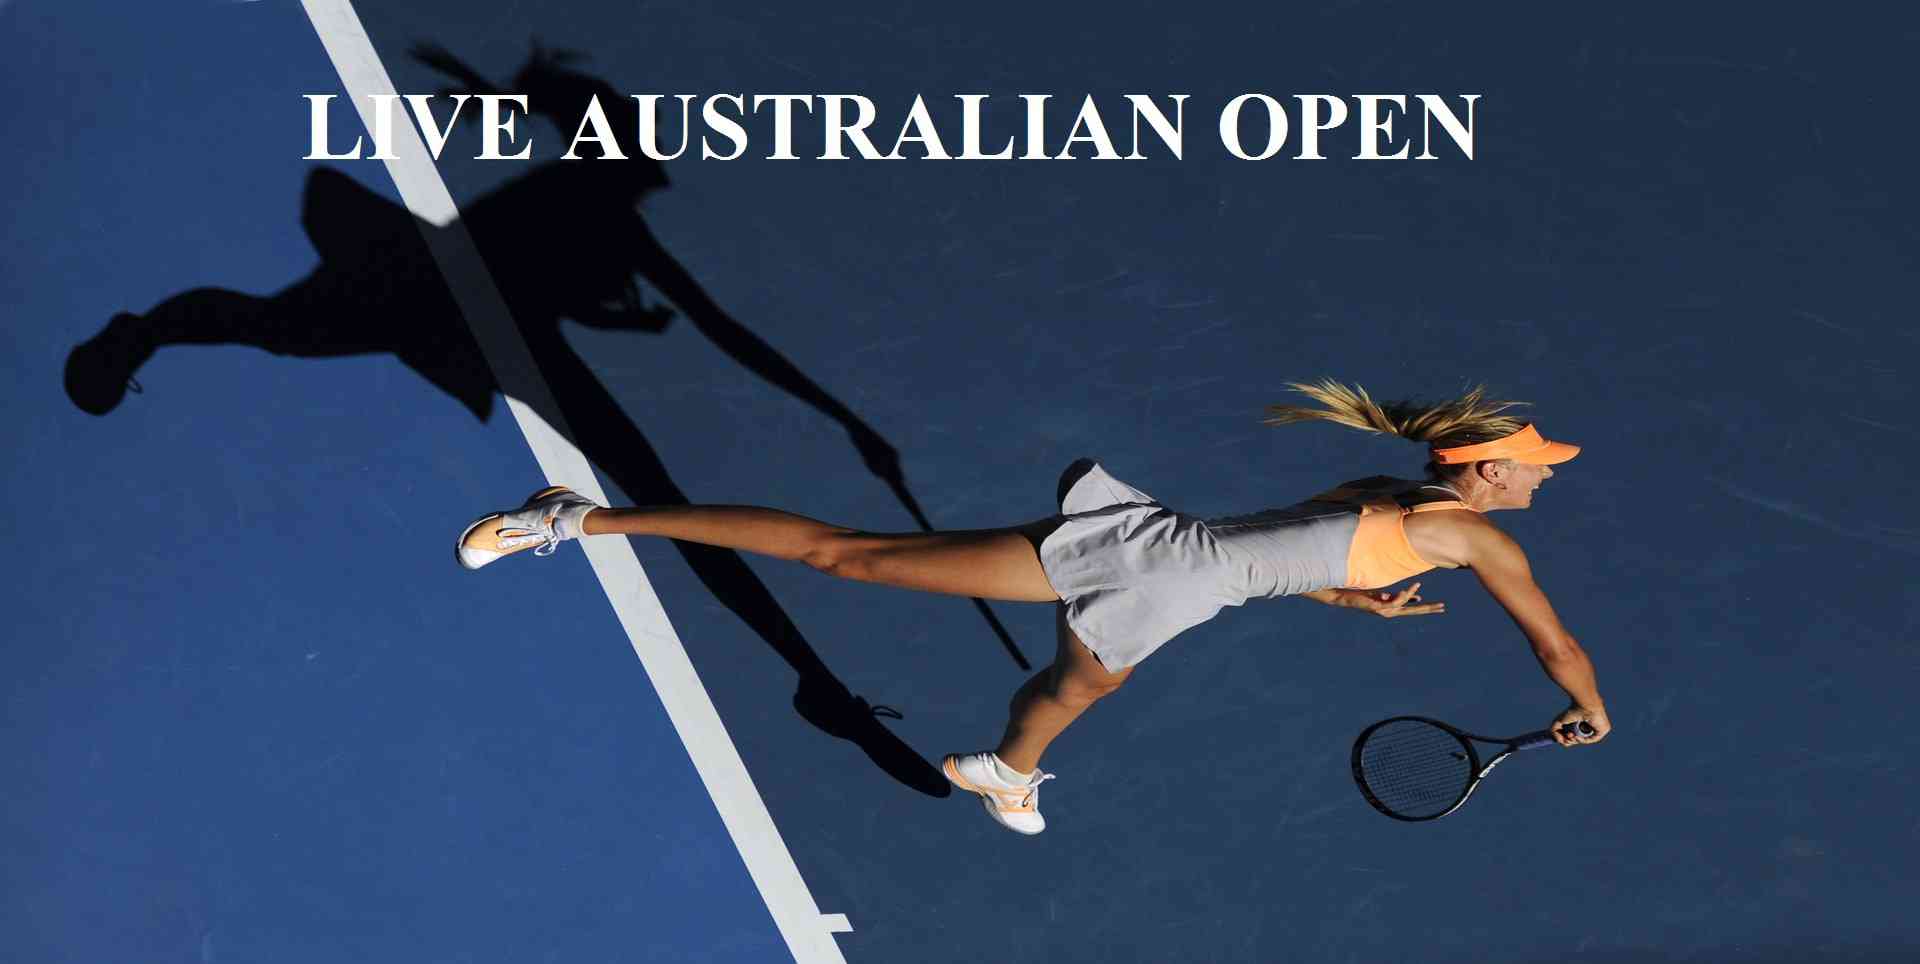 How to Watch Australian Open Live Streaming in USA and UK